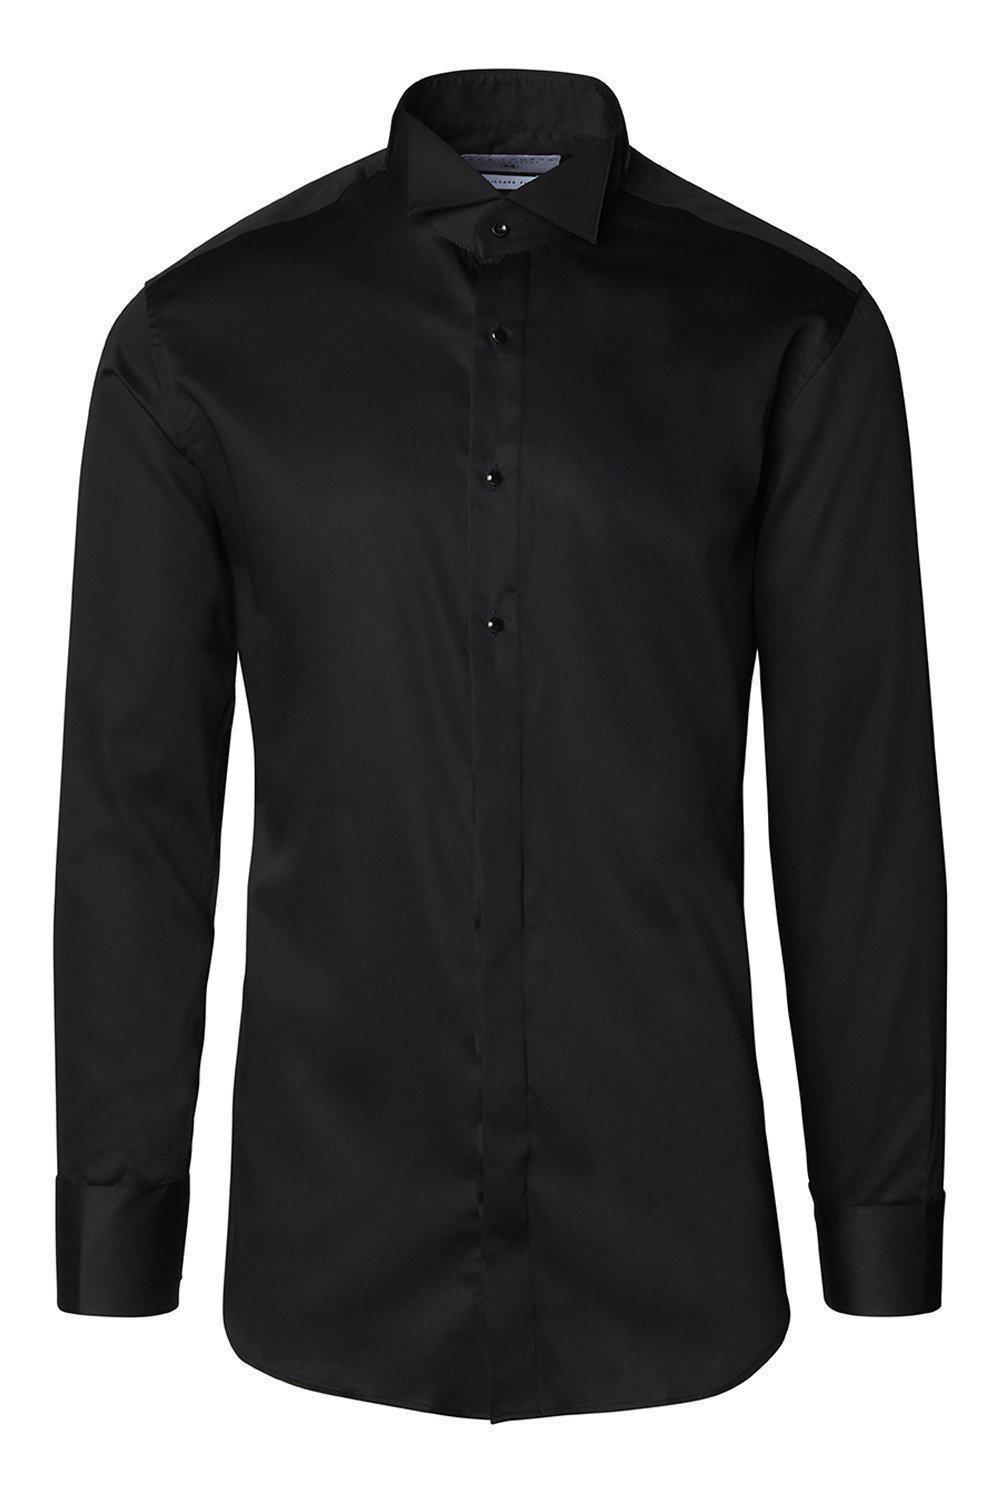 WING CLASSICAL TOP 3 FRONT STUD TUXEDO SHIRT - Black - Ron Tomson